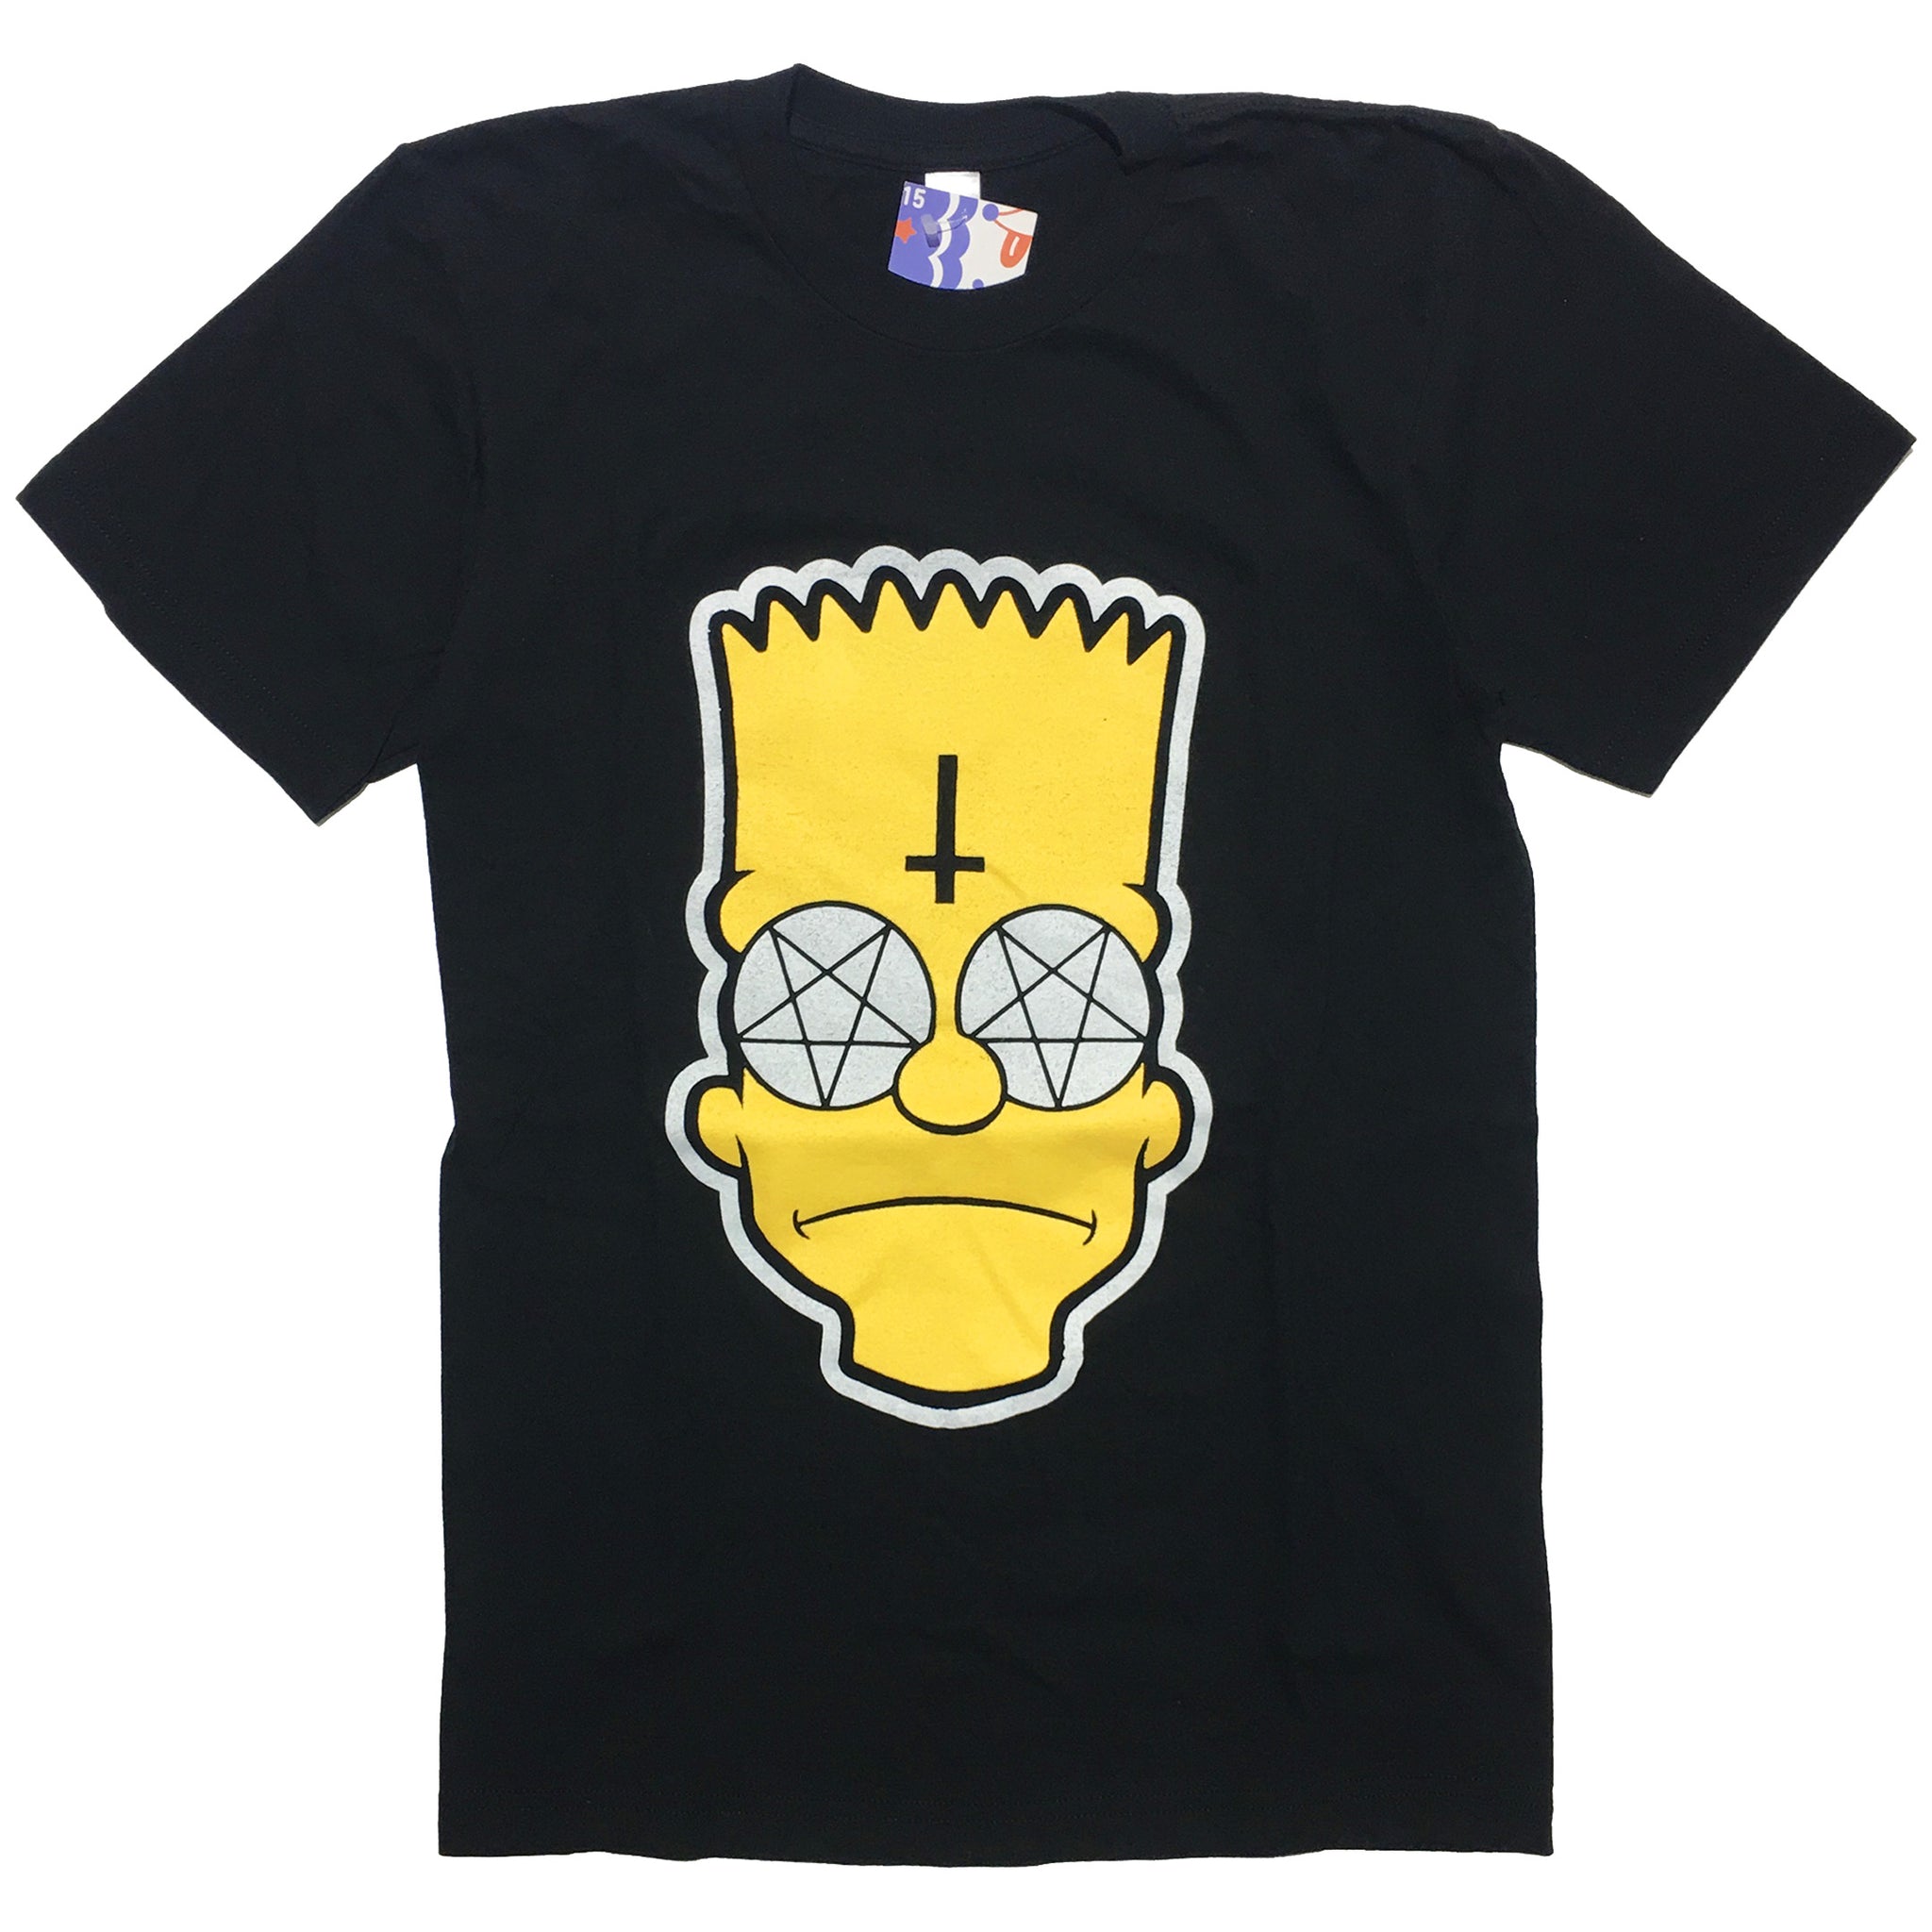 BACK IN STOCK! Witchy Bart Tee by Blim